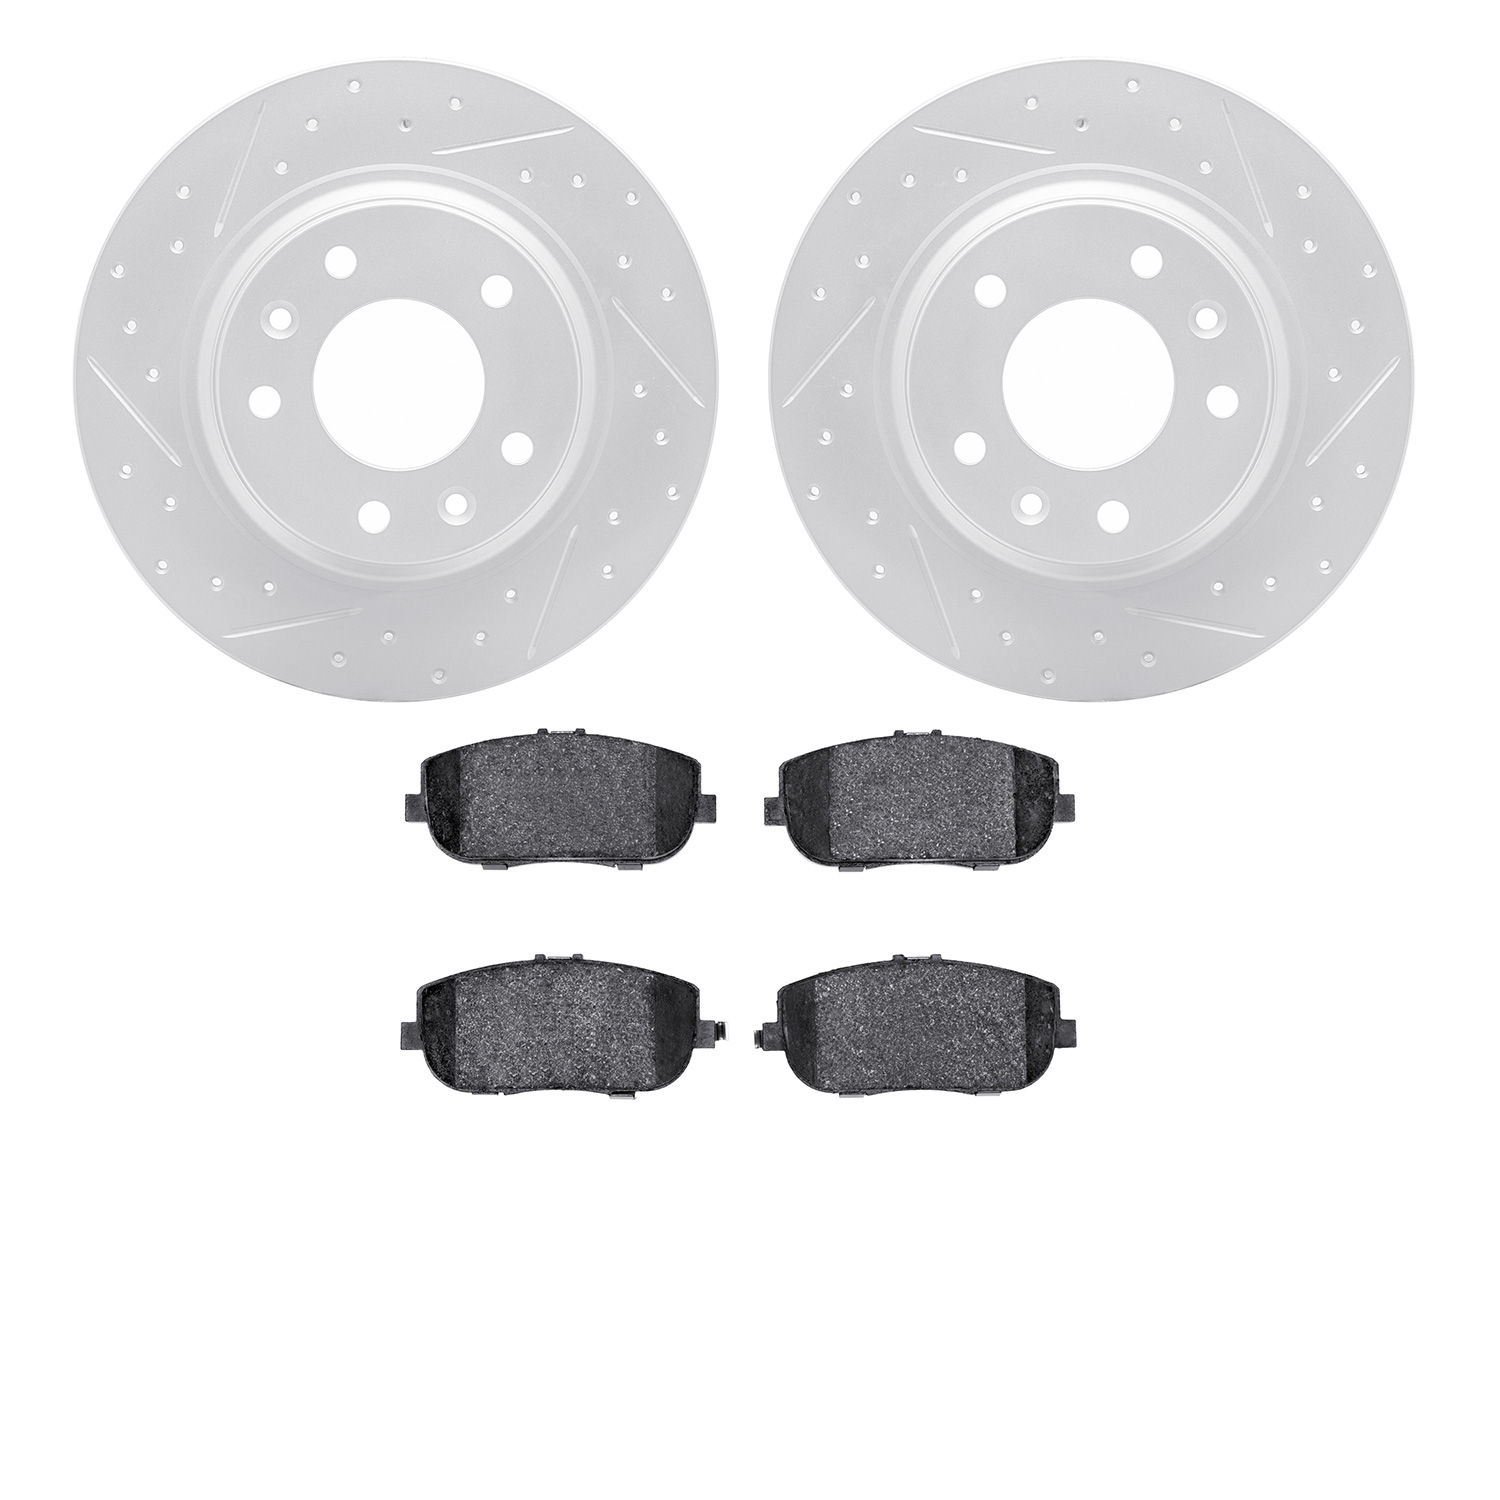 2502-54061 Geoperformance Drilled/Slotted Rotors w/5000 Advanced Brake Pads Kit, 2006-2015 Ford/Lincoln/Mercury/Mazda, Position: